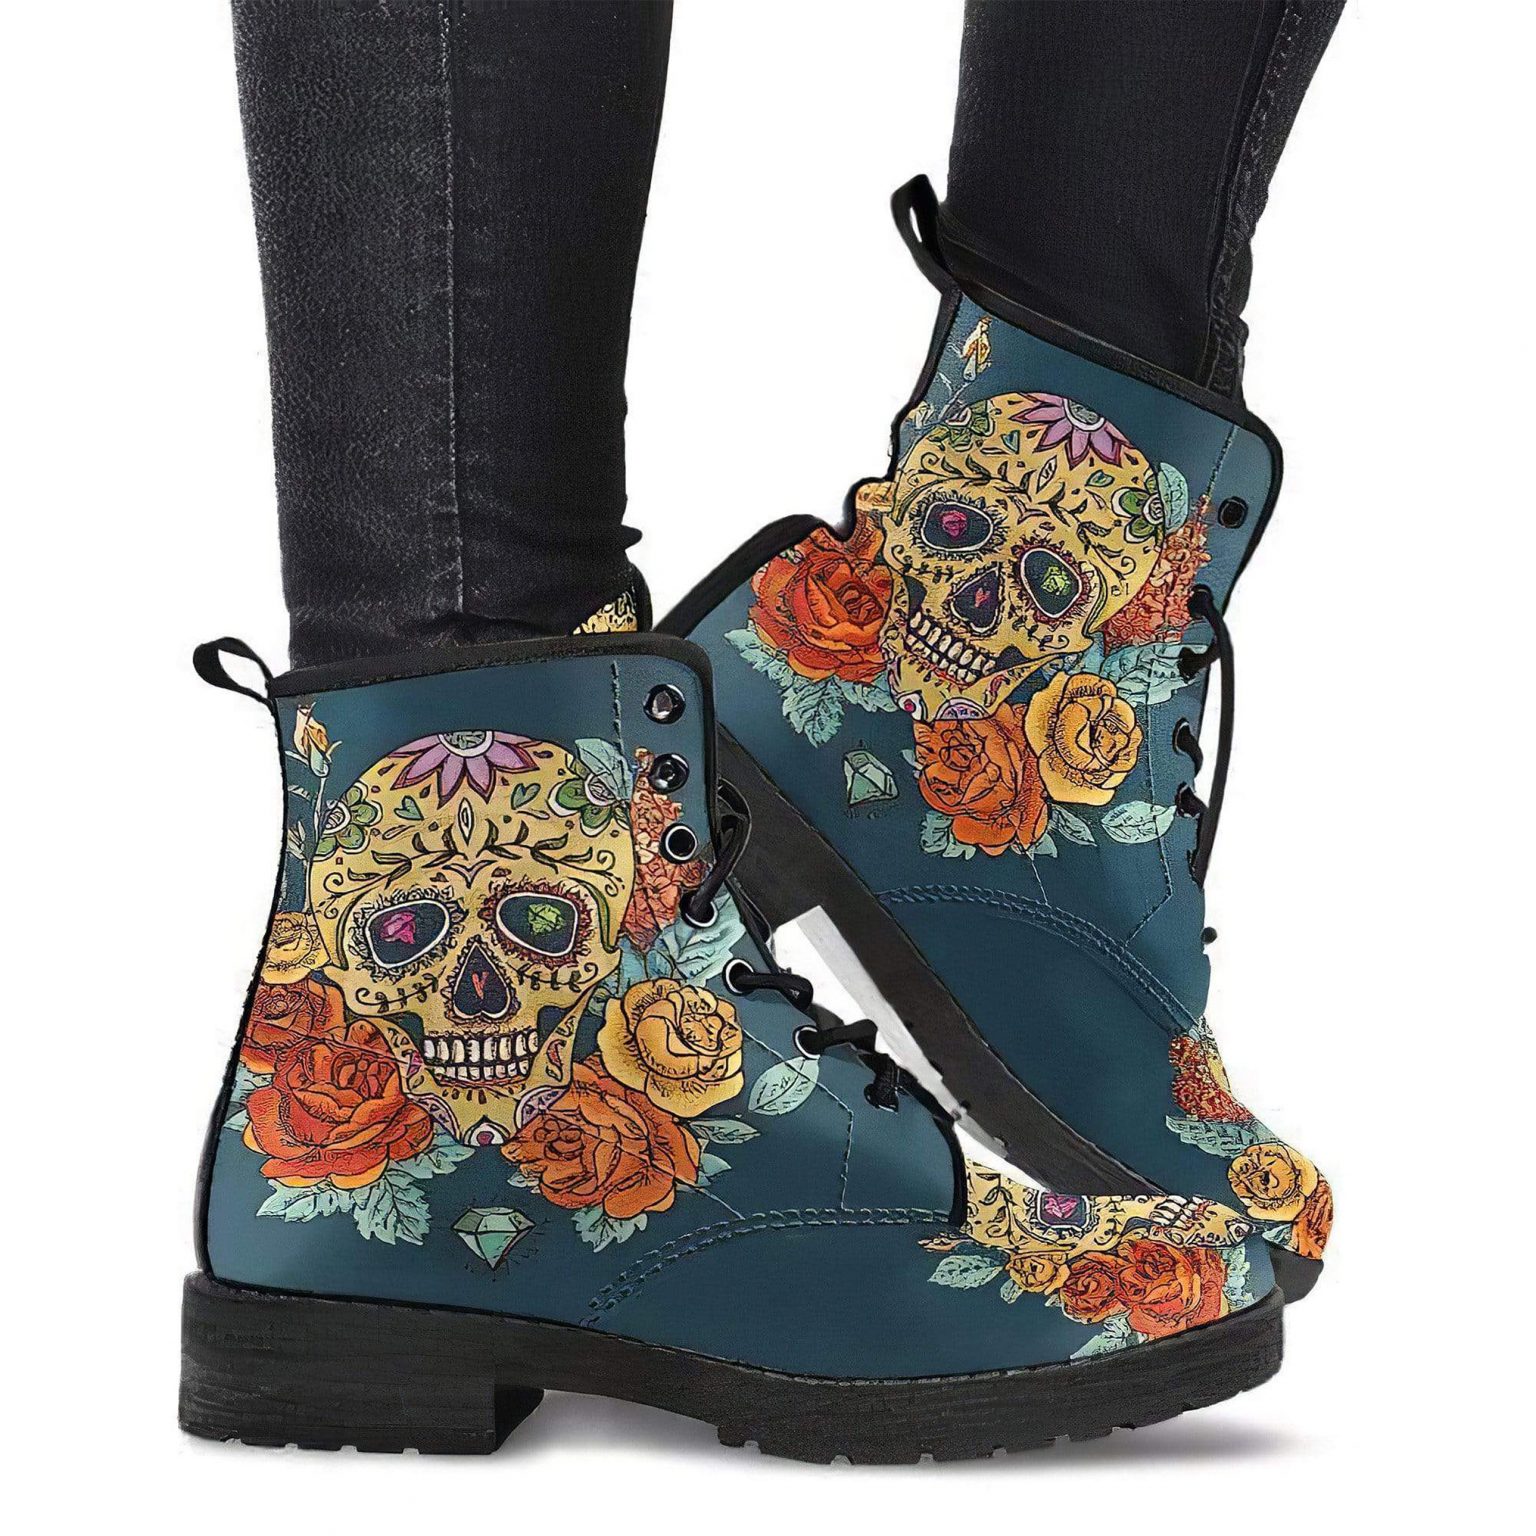 Sugar Skull Women S Boots Vegan Friendly Leather Women S Leather Boots 2 1536x1536 